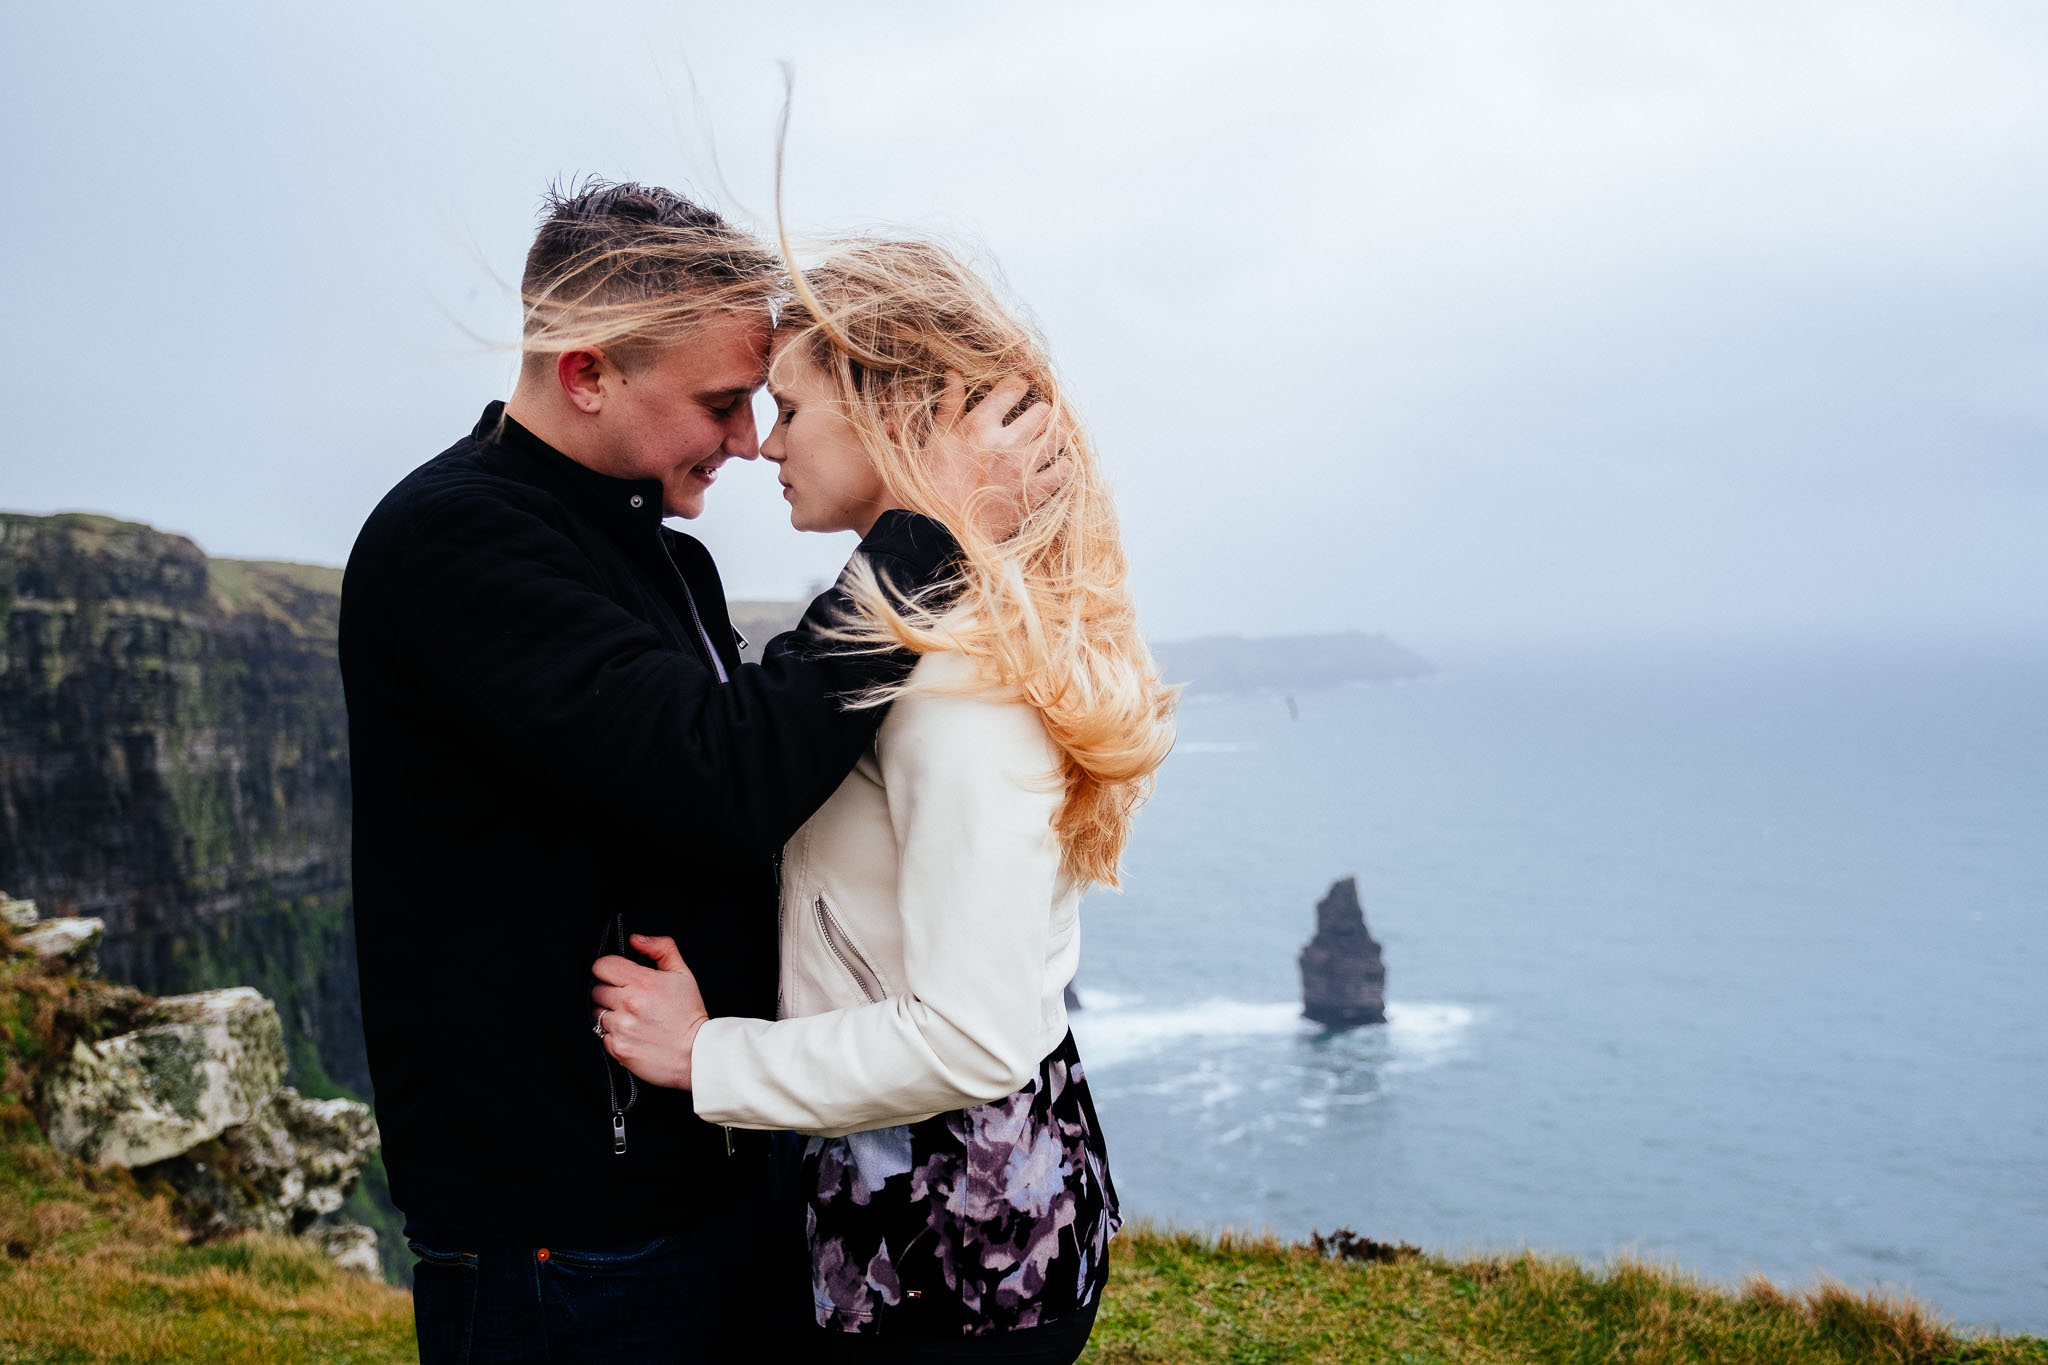 New Irish service offers to transform your online dating profile 